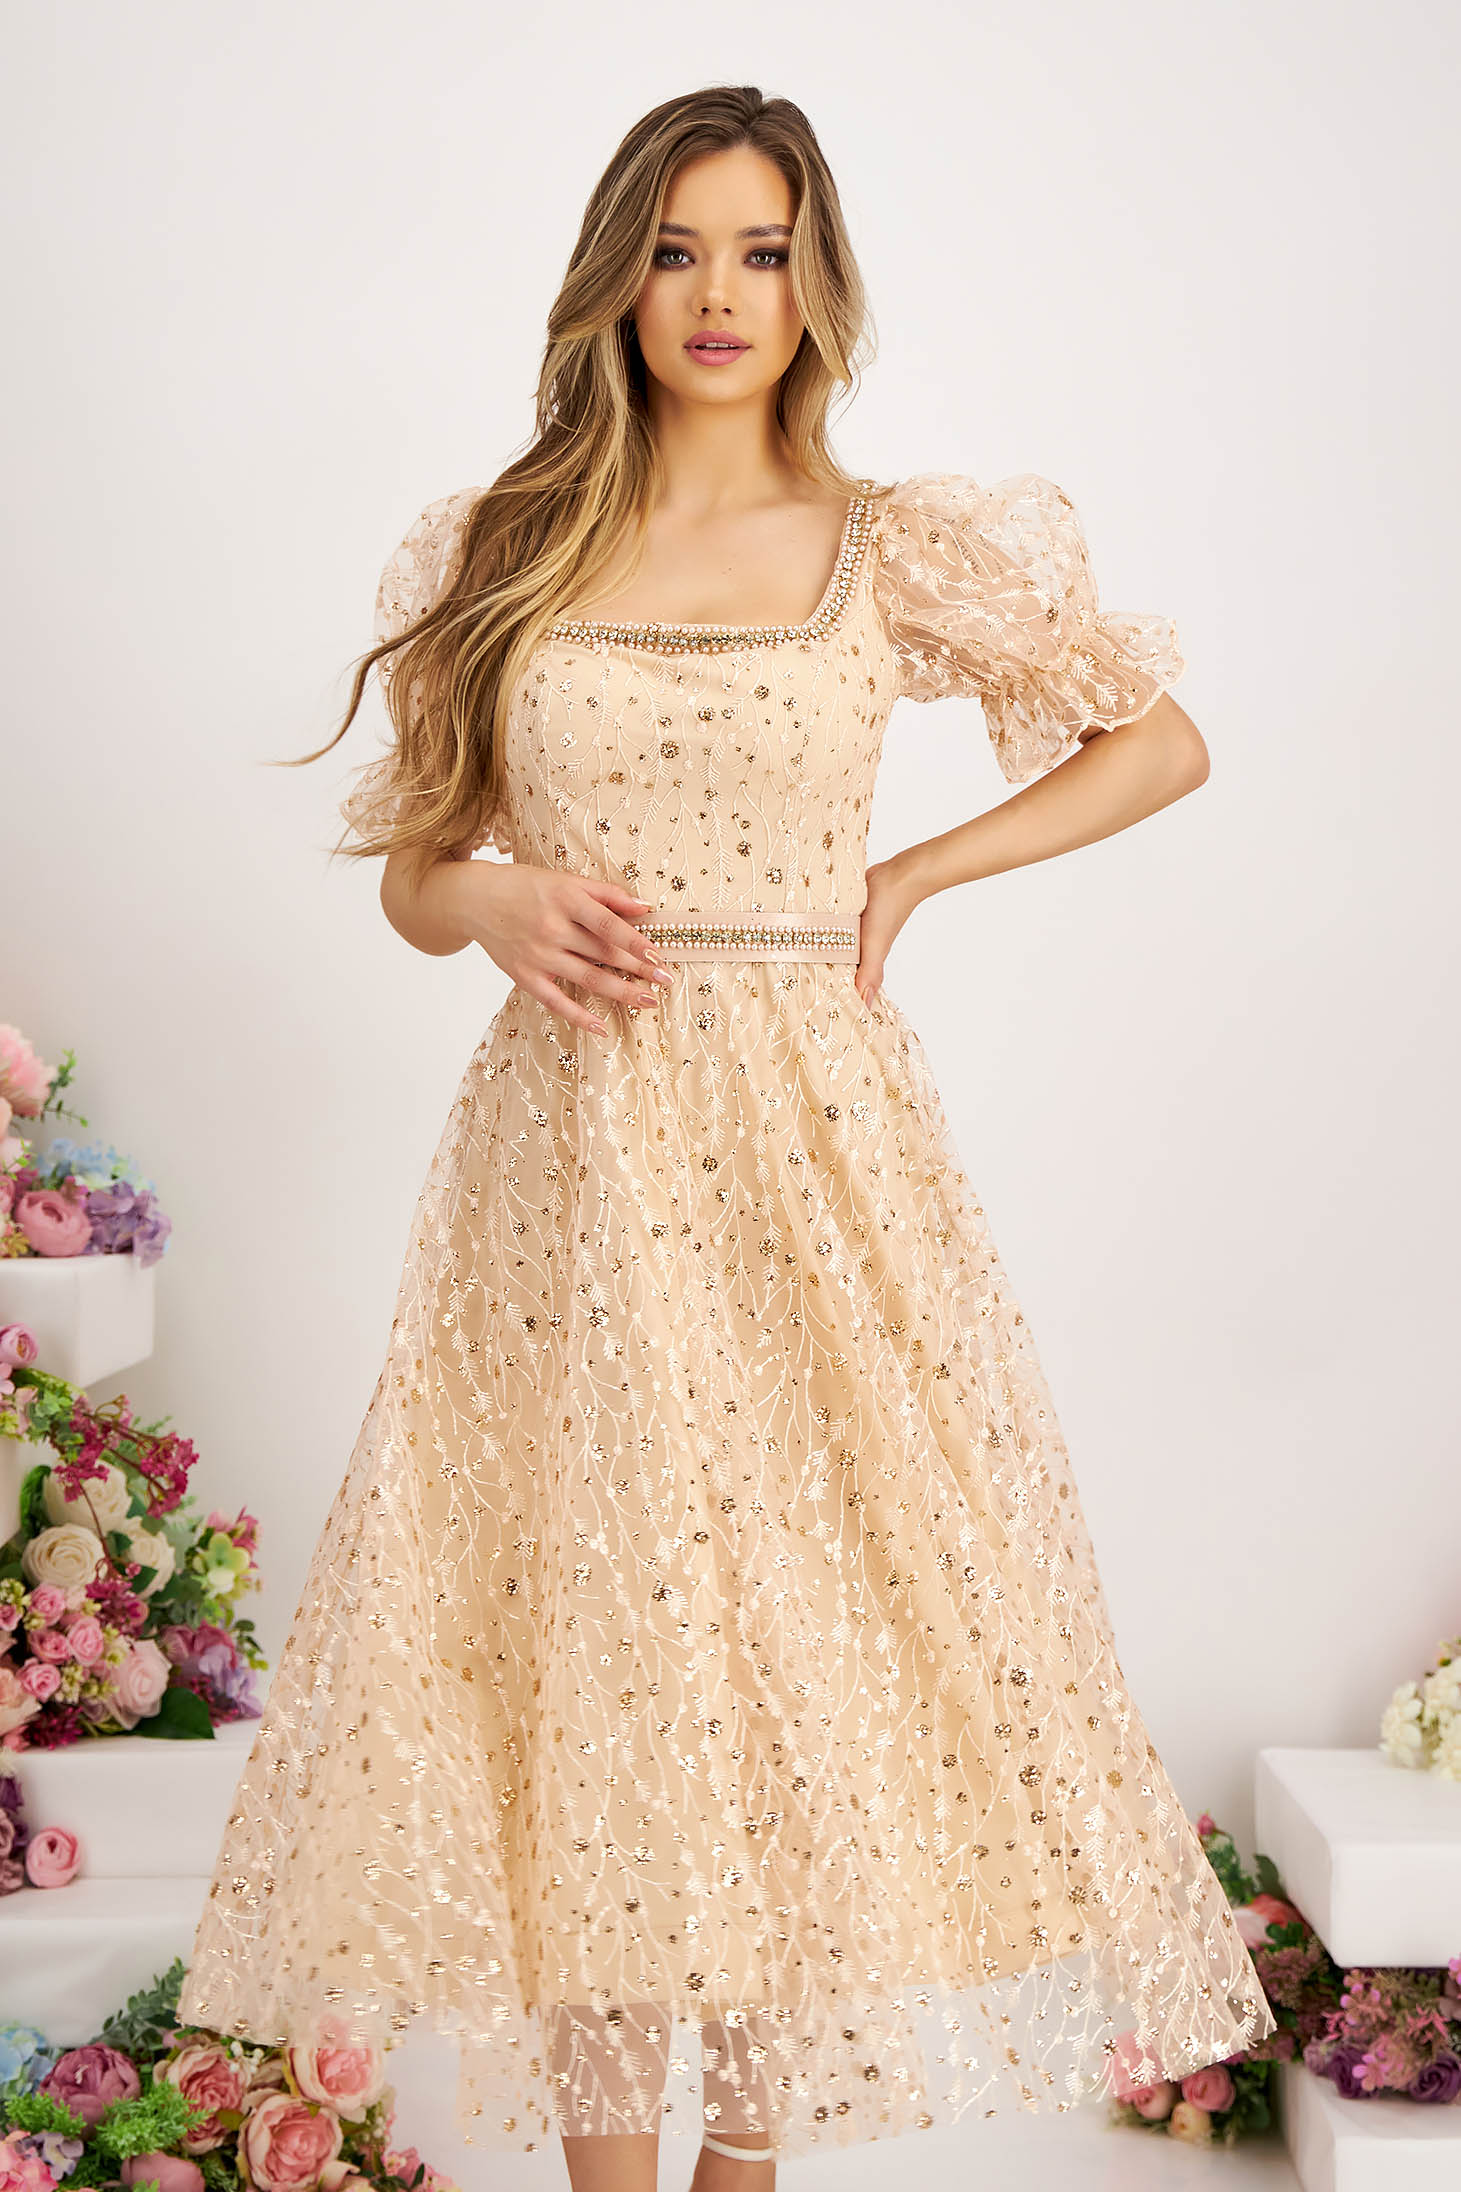 Beige dress from tulle with glitter details midi cloche accessorized with belt